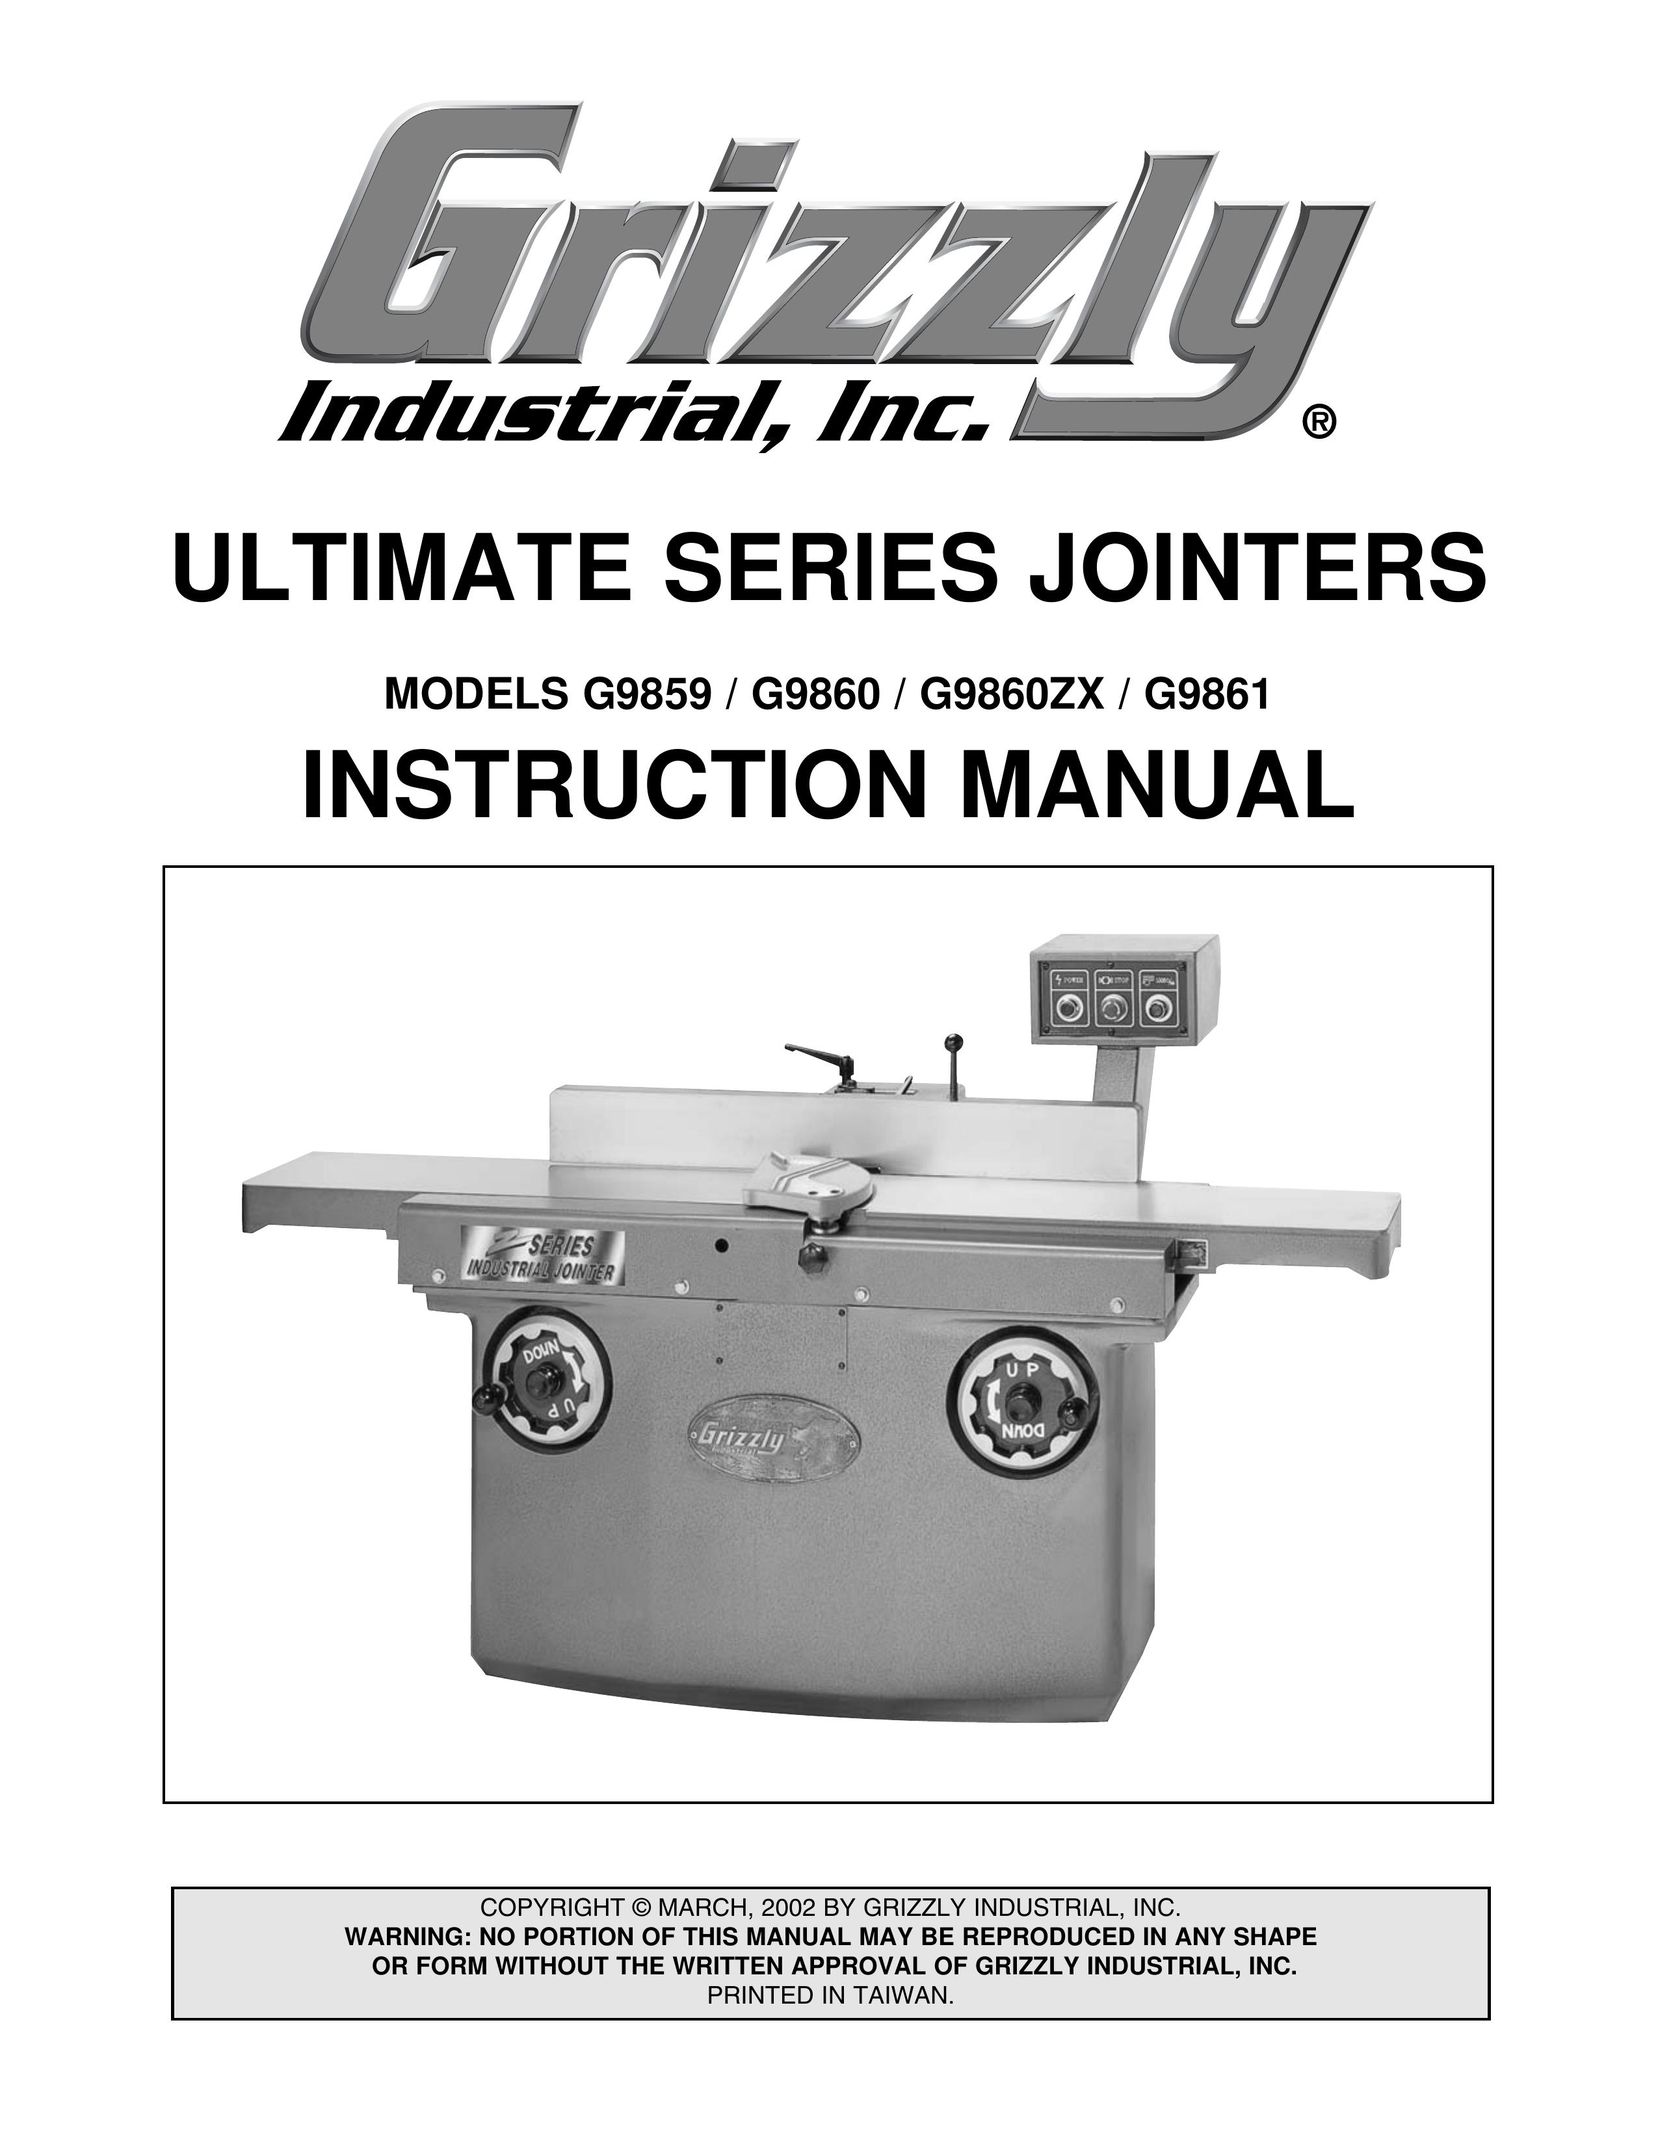 Grizzly G9860ZX Biscuit Joiner User Manual